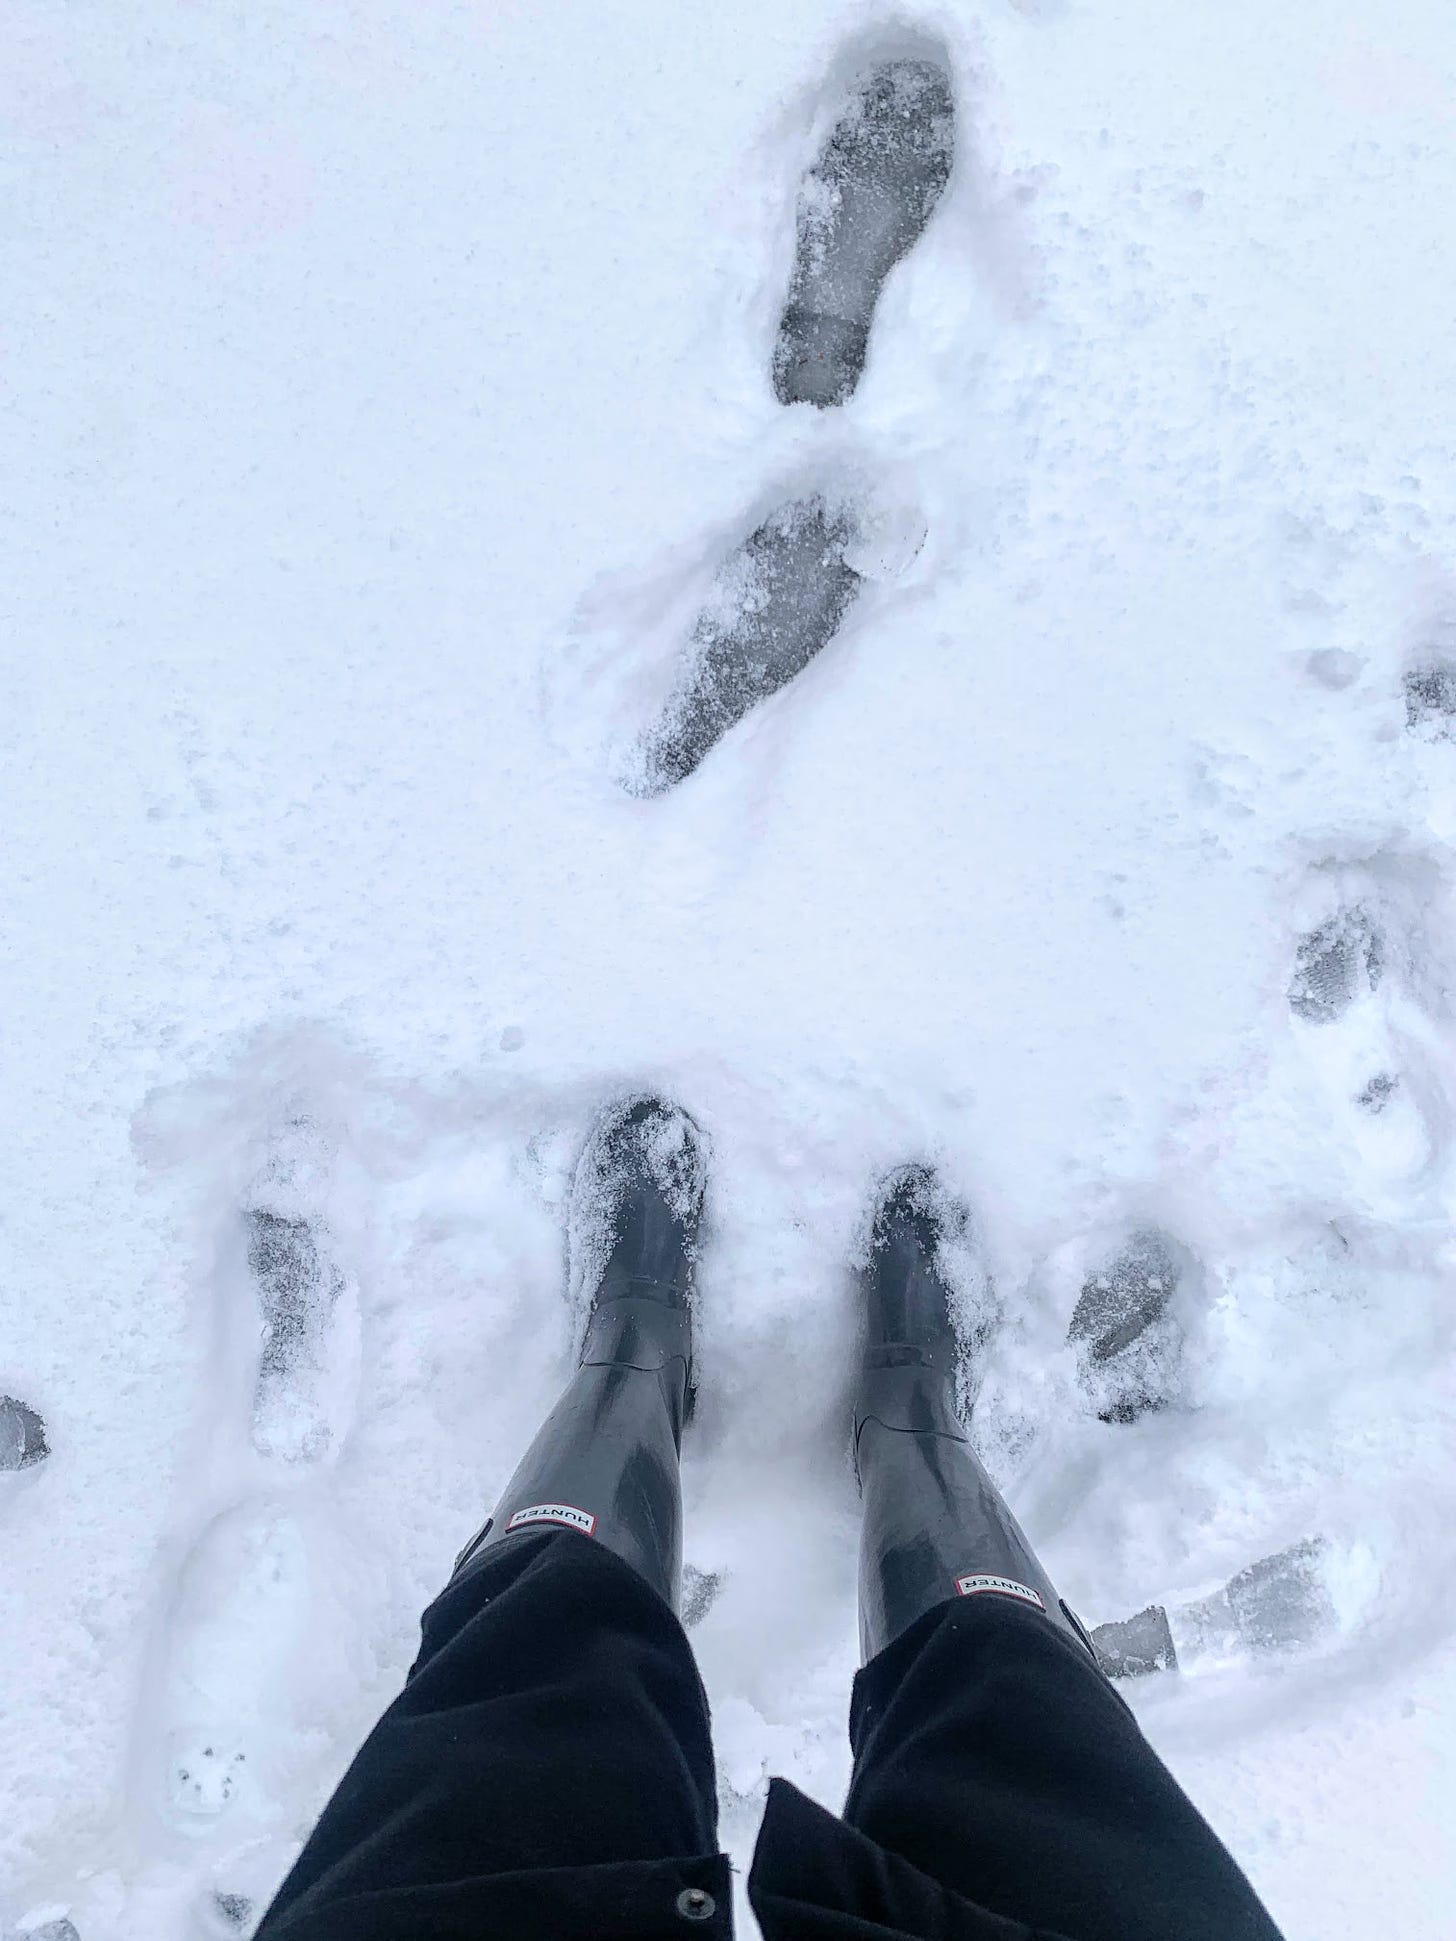 Rainboots and footprints in snow